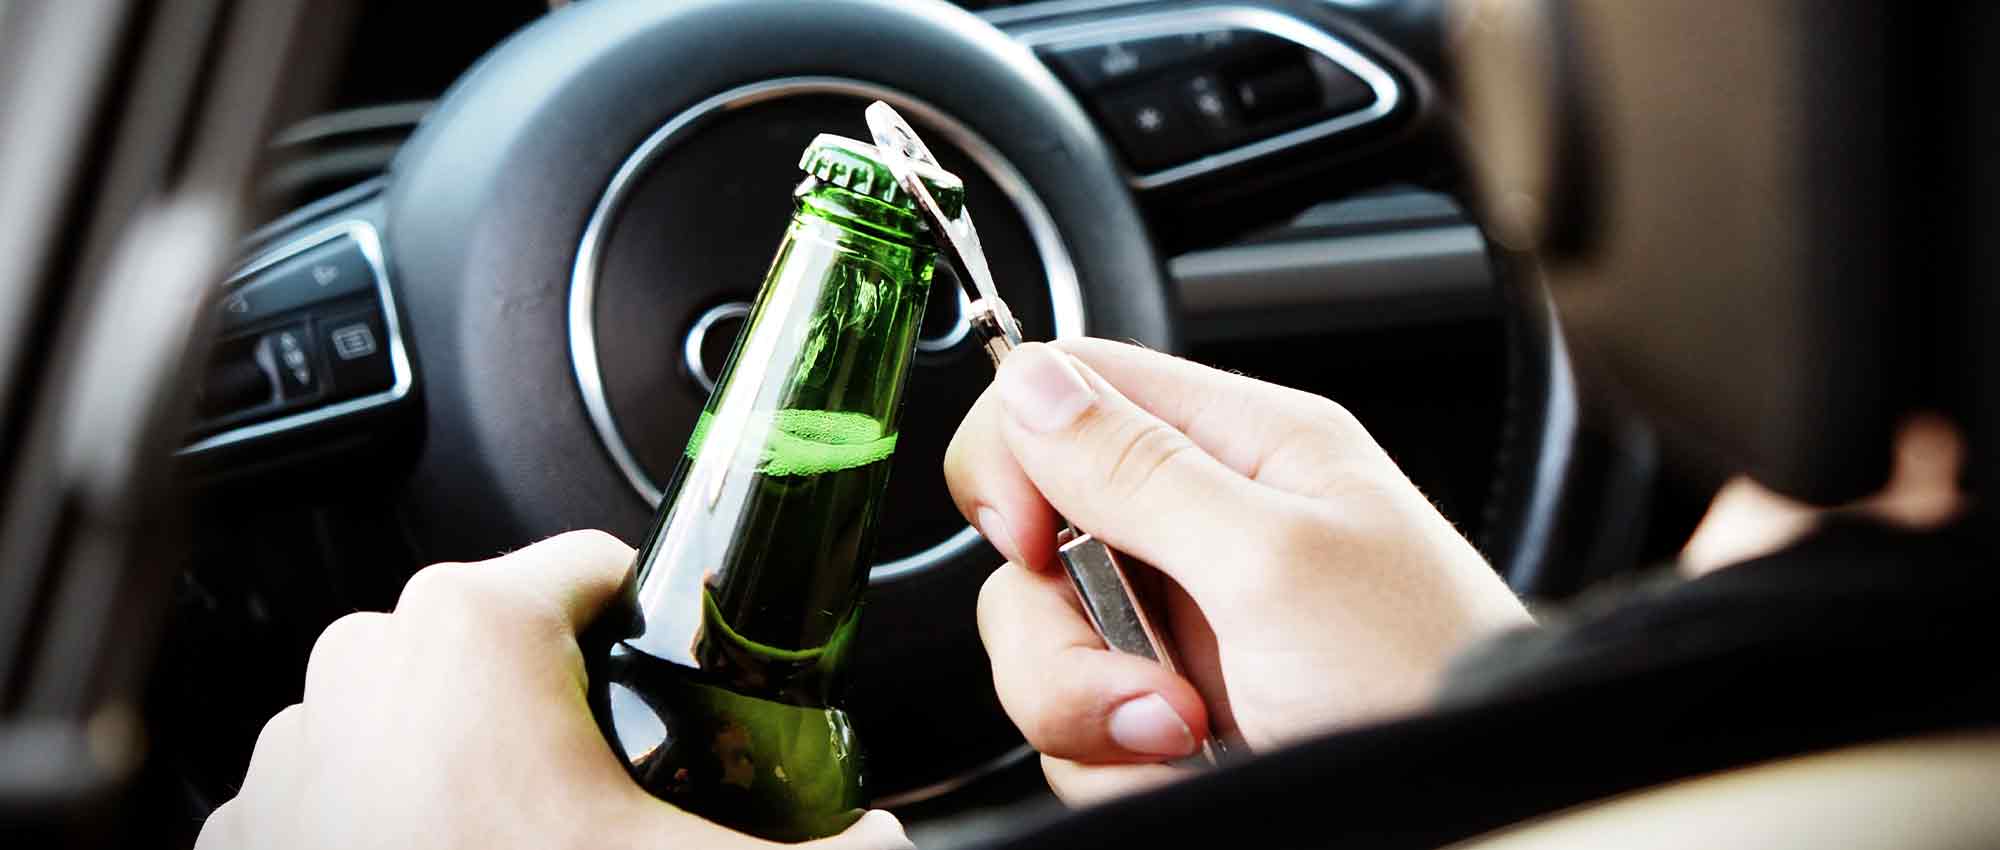 Motorist opens a beer bottle while about to get on the road.